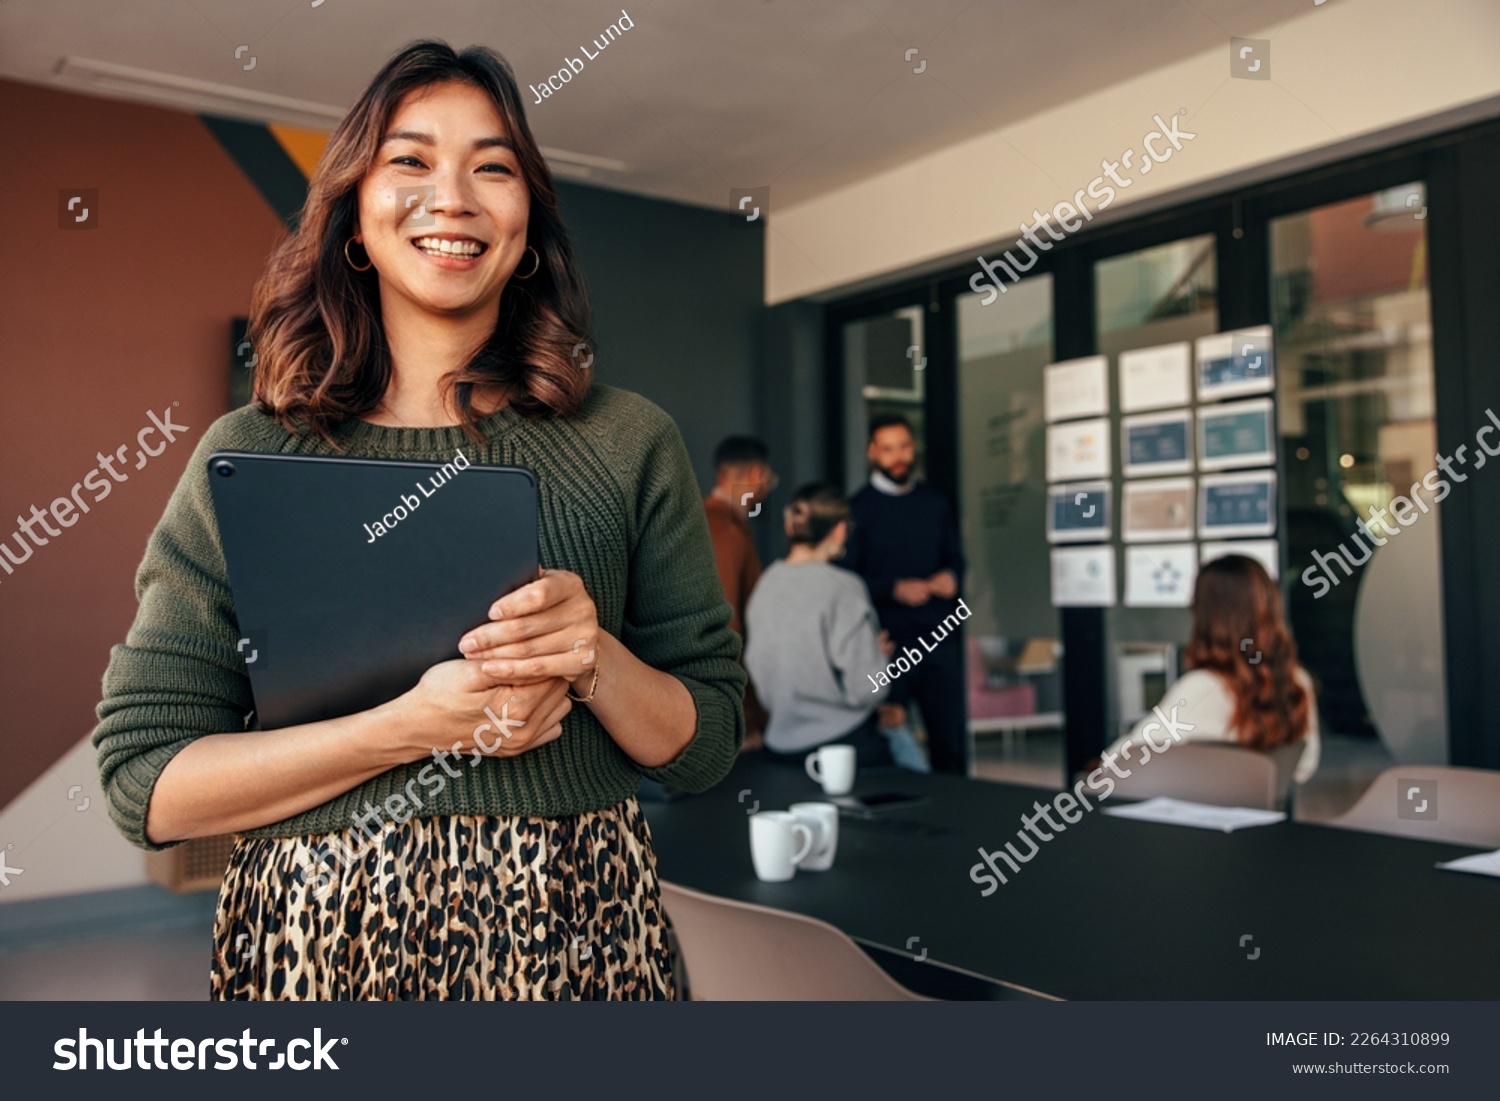 Cheerful young businesswoman smiling at the camera while holding a digital tablet. Happy young businesswoman standing in a boardroom with her colleagues in the background. #2264310899